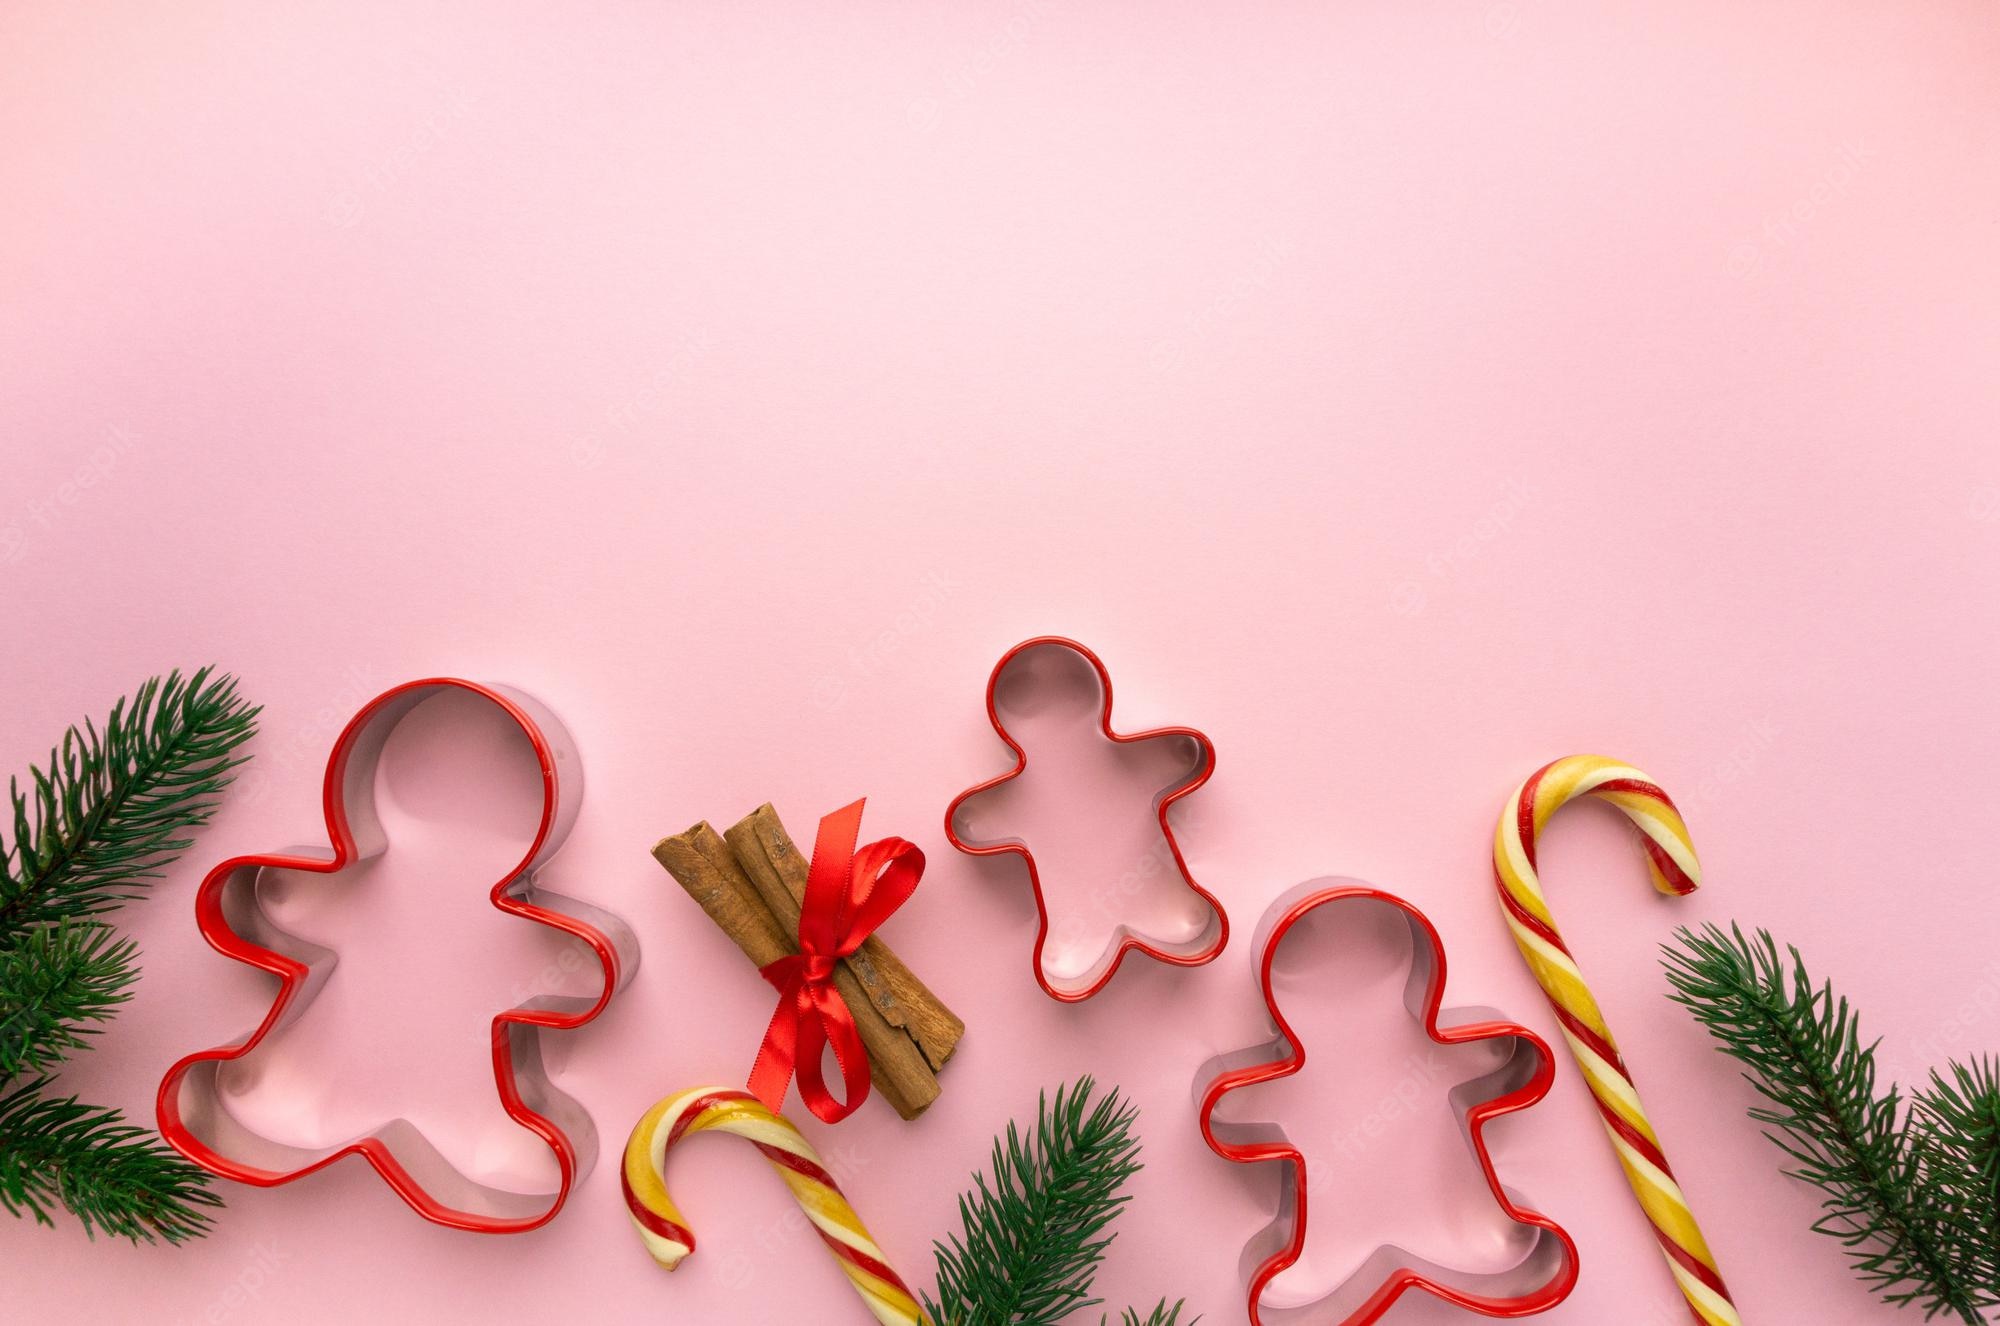 Premium Photo. Christmas cookie cutters in the shape of man on pink background, space for text